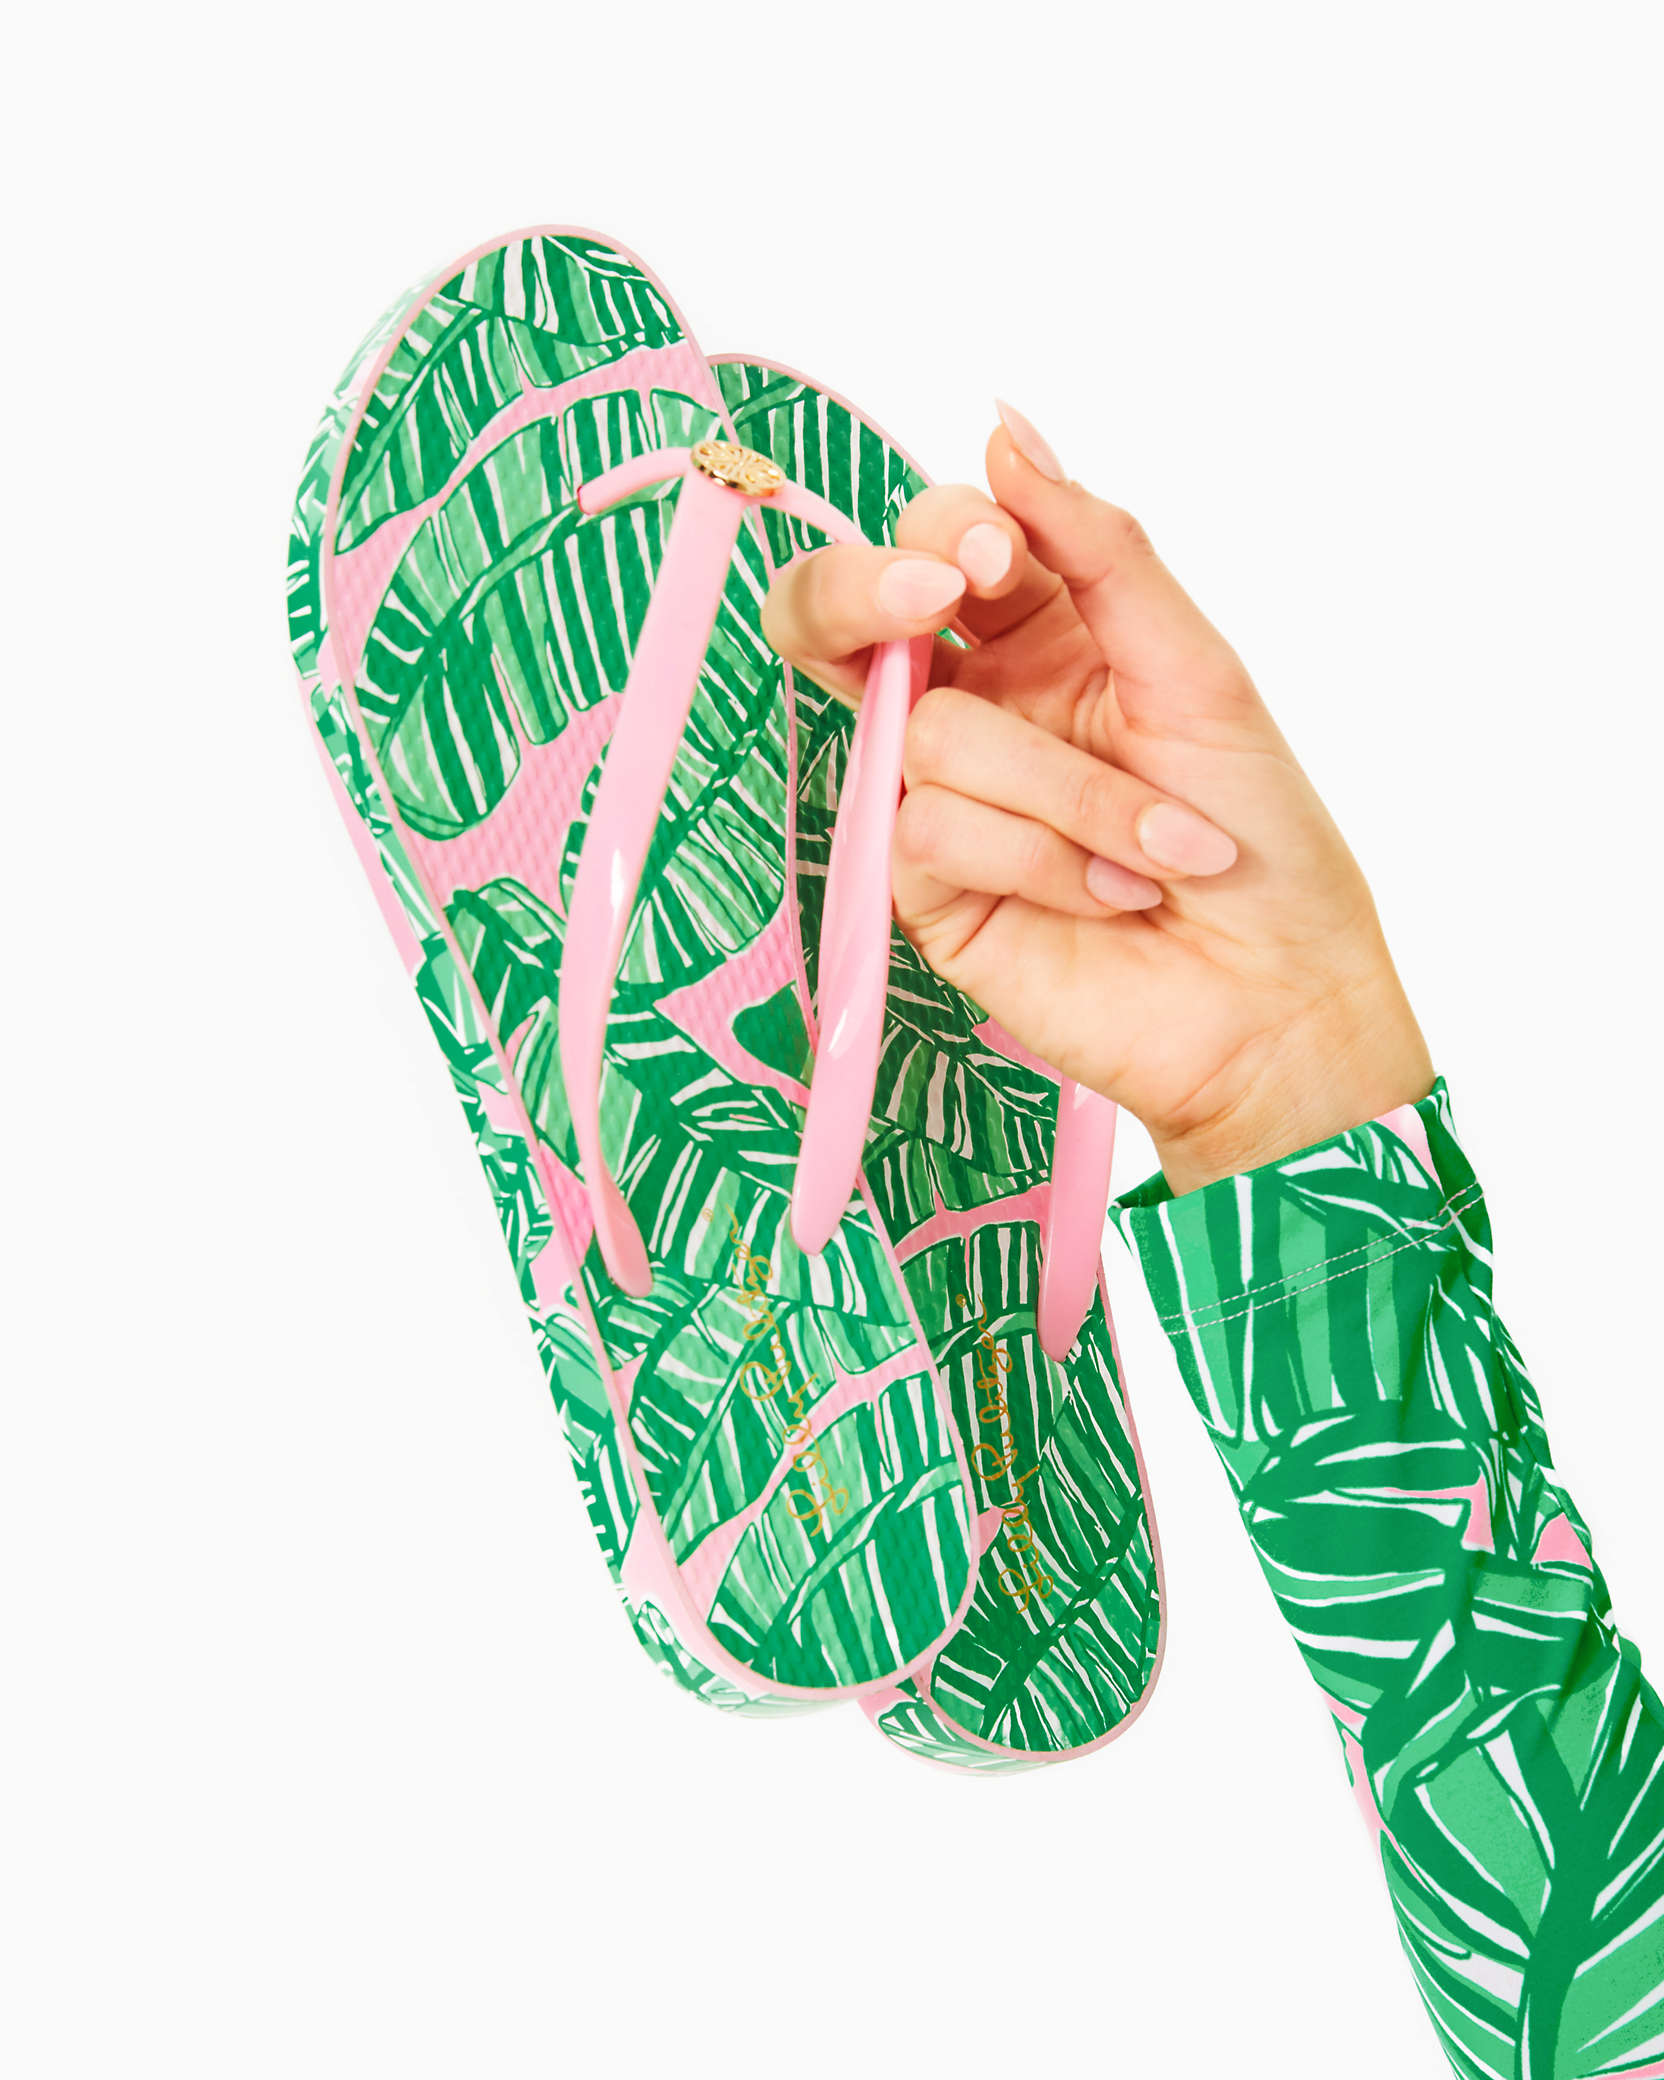 Shop Lilly Pulitzer Pool Flip Flop In Conch Shell Pink Lets Go Bananas Shoe